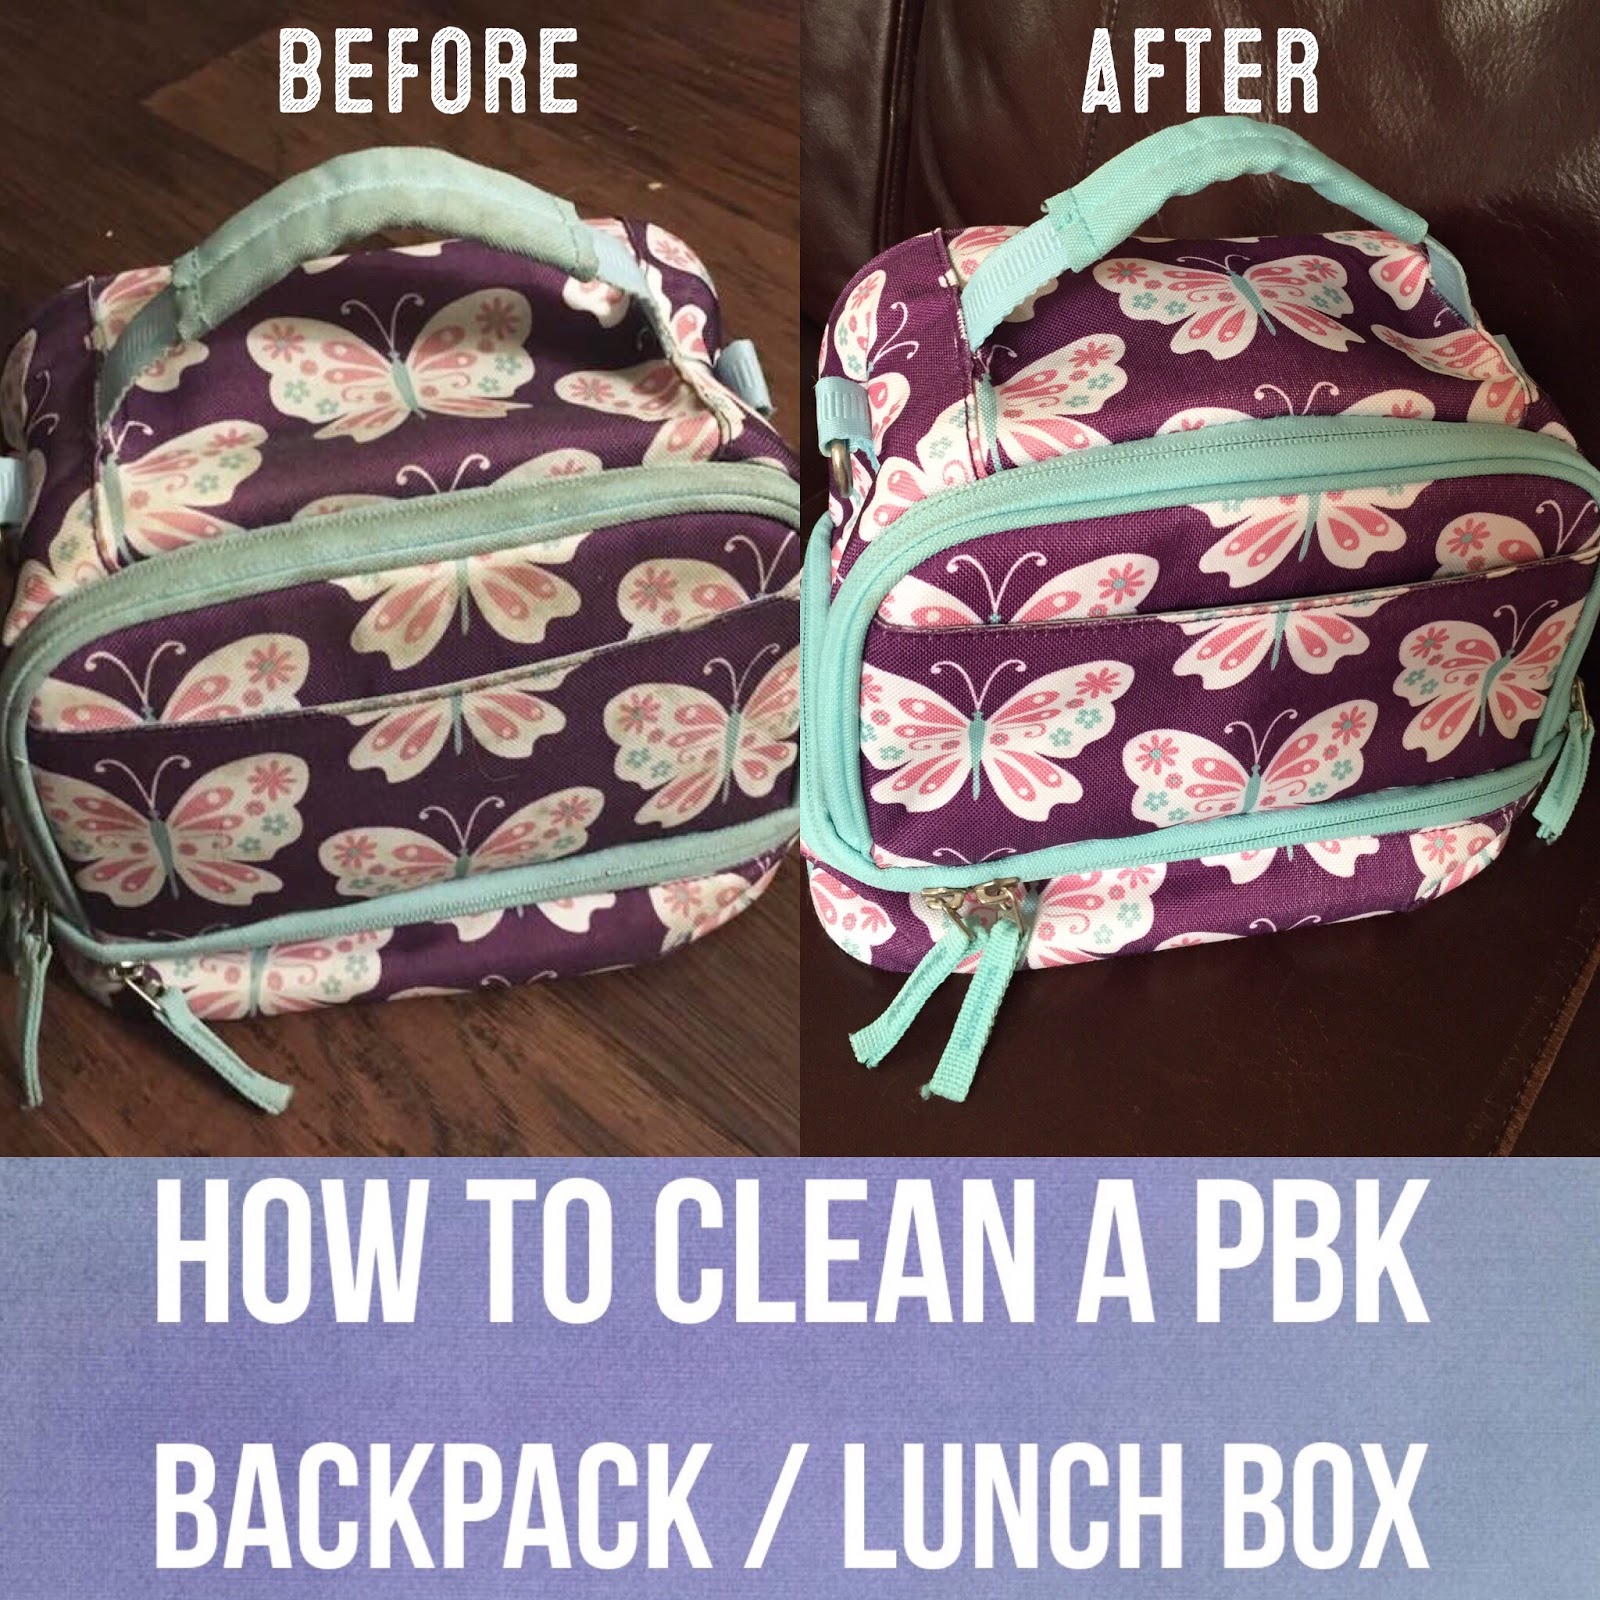 Live and Learn: DIY: How to Clean a Pottery Barn Kids Backpack / Lunch Box